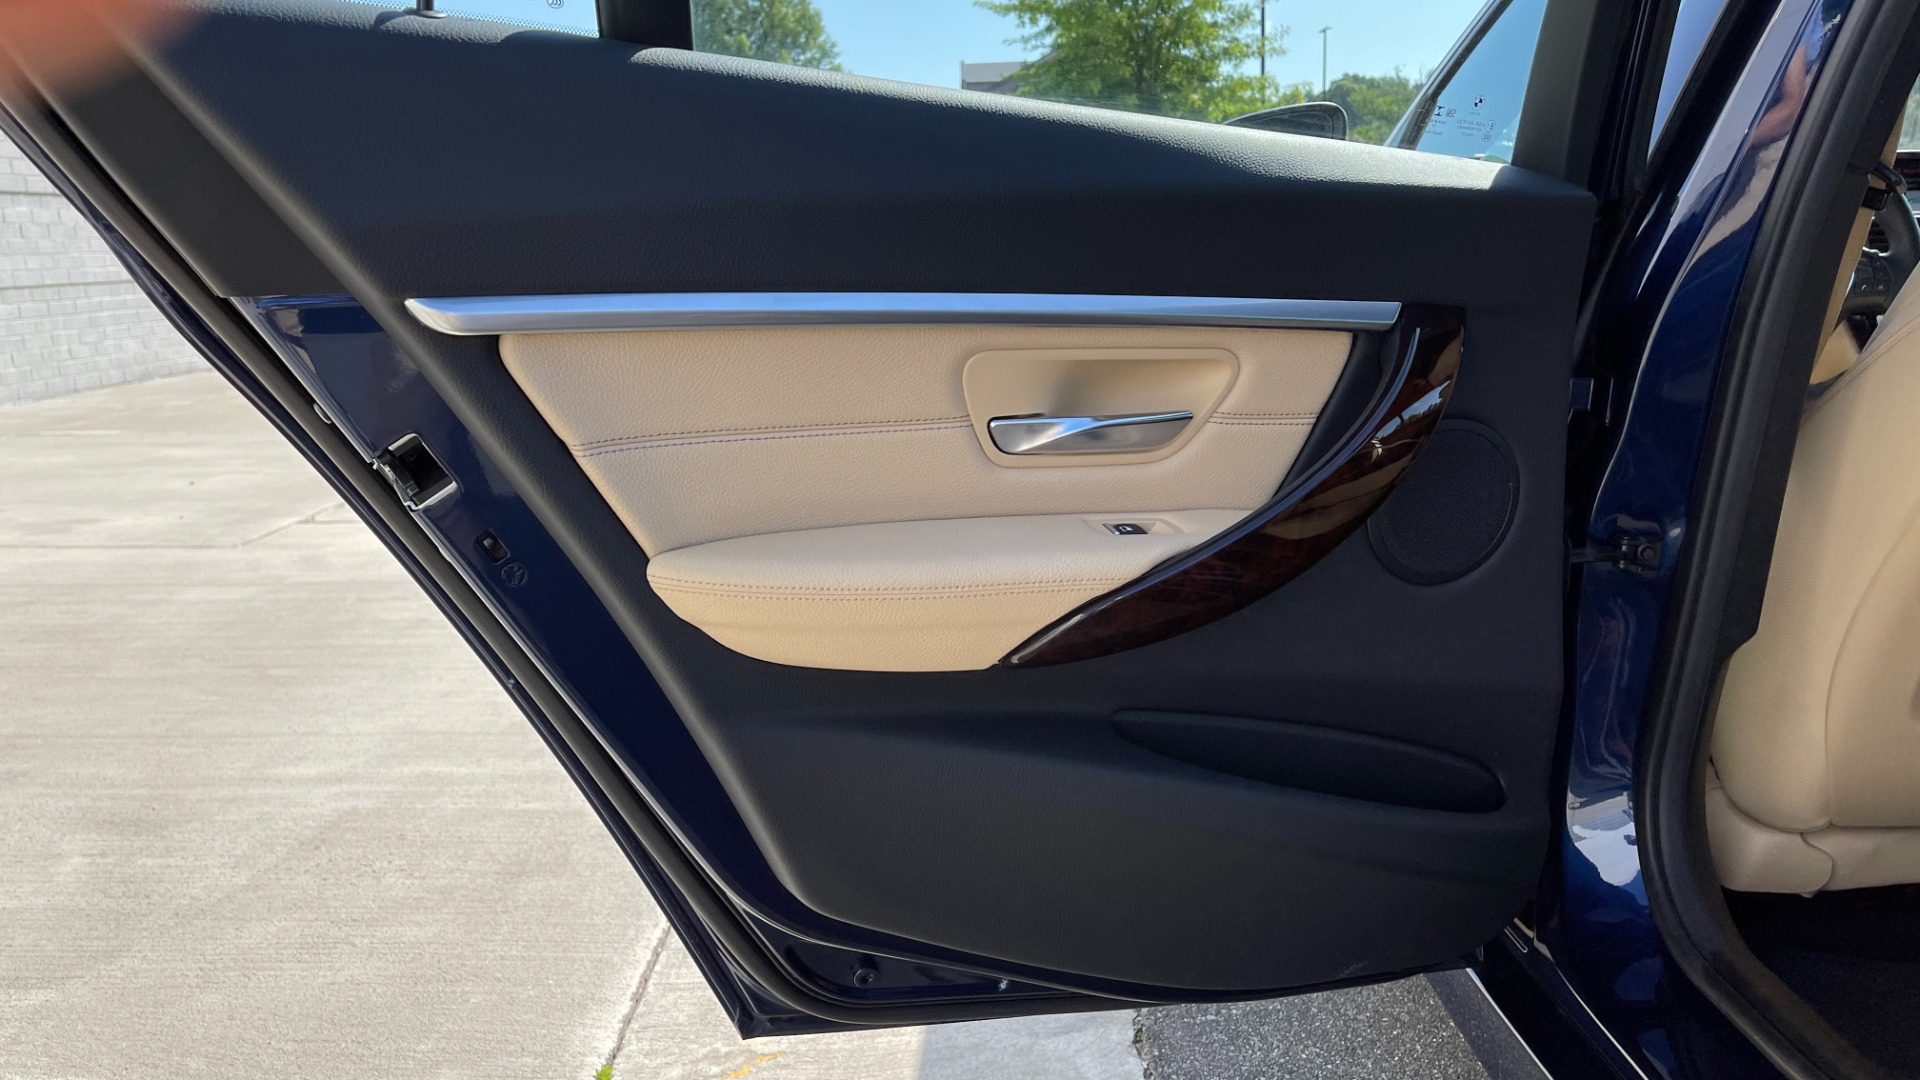 Used 2018 BMW 3 SERIES 330I XDRIVE / CONV PKG / SUNROOF / HTD STS / BLIND SPOT for sale Sold at Formula Imports in Charlotte NC 28227 54